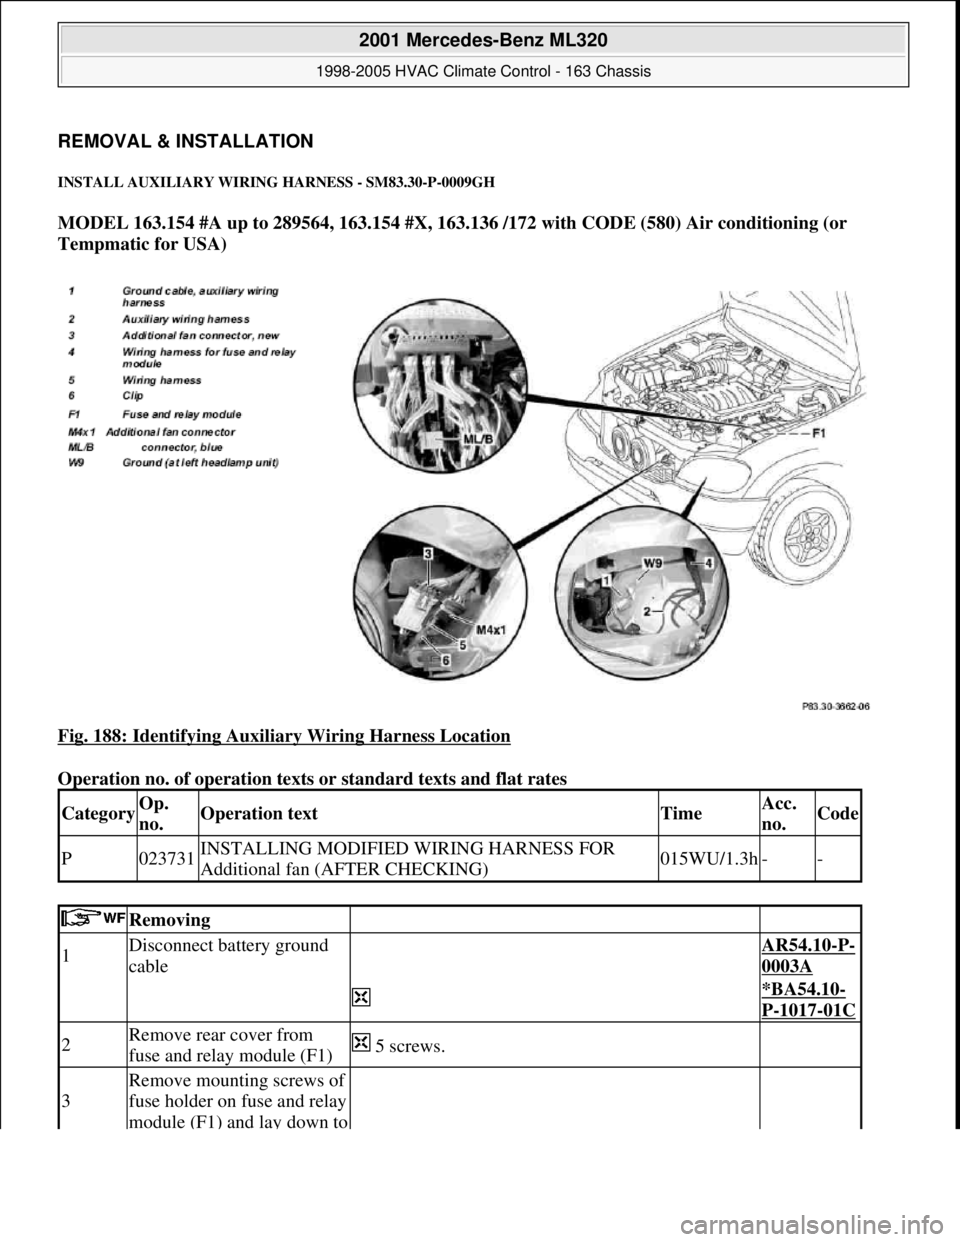 MERCEDES-BENZ ML320 1997  Complete Repair Manual REMOVAL & INSTALLATION 
INSTALL AUXILIARY WIRING HARNESS - SM83.30-P-0009GH 
MODEL 163.154 #A up to 289564, 163.154 #X, 163.136 /172 with CODE (580) Air conditioning (or 
Tempmatic for USA)  
Fig. 188